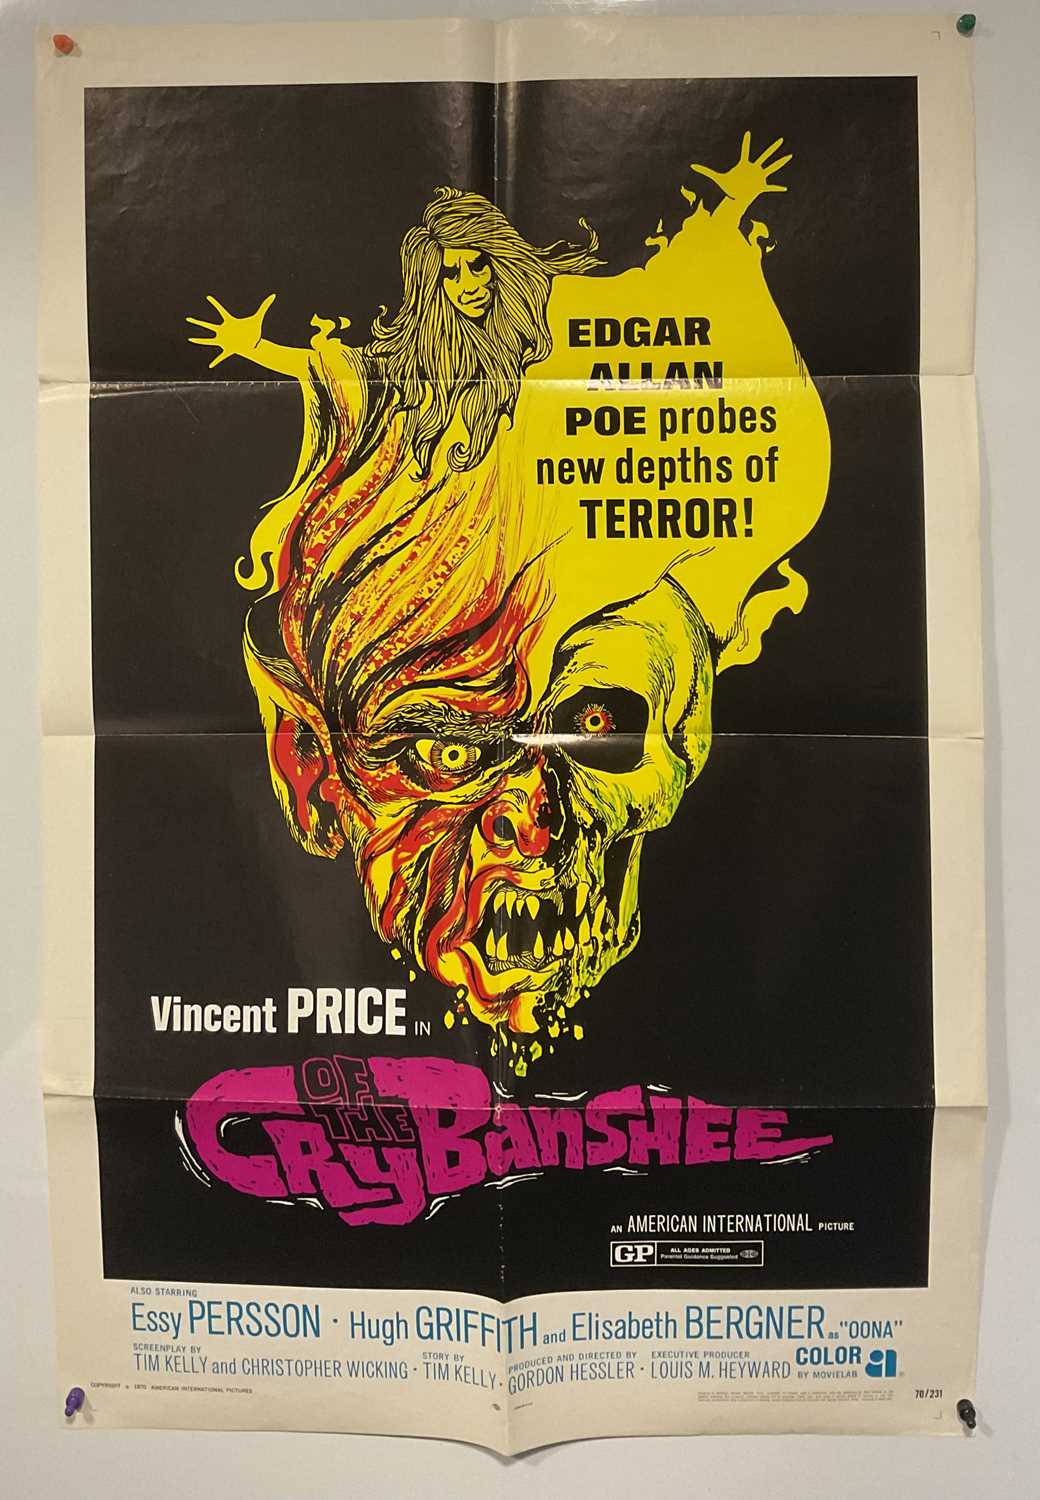 CRY OF THE BANSHEE (1970) US one sheet film poster, Edgar Allen Poe inspired horror directed by